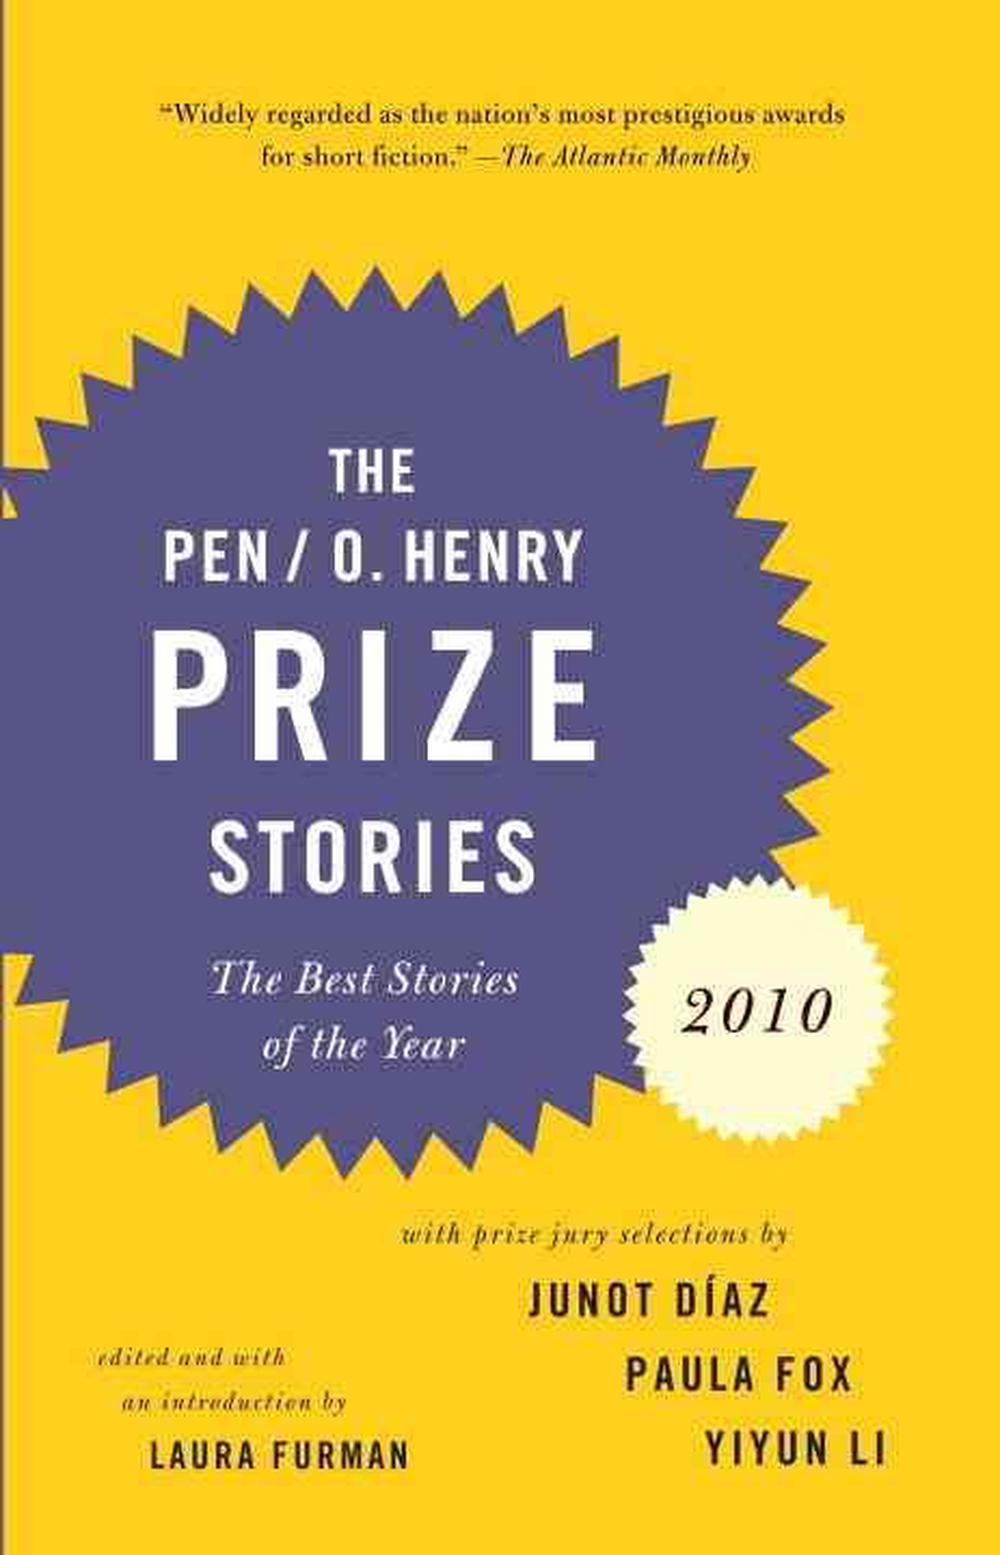 the best short stories 2021 the o henry prize winners